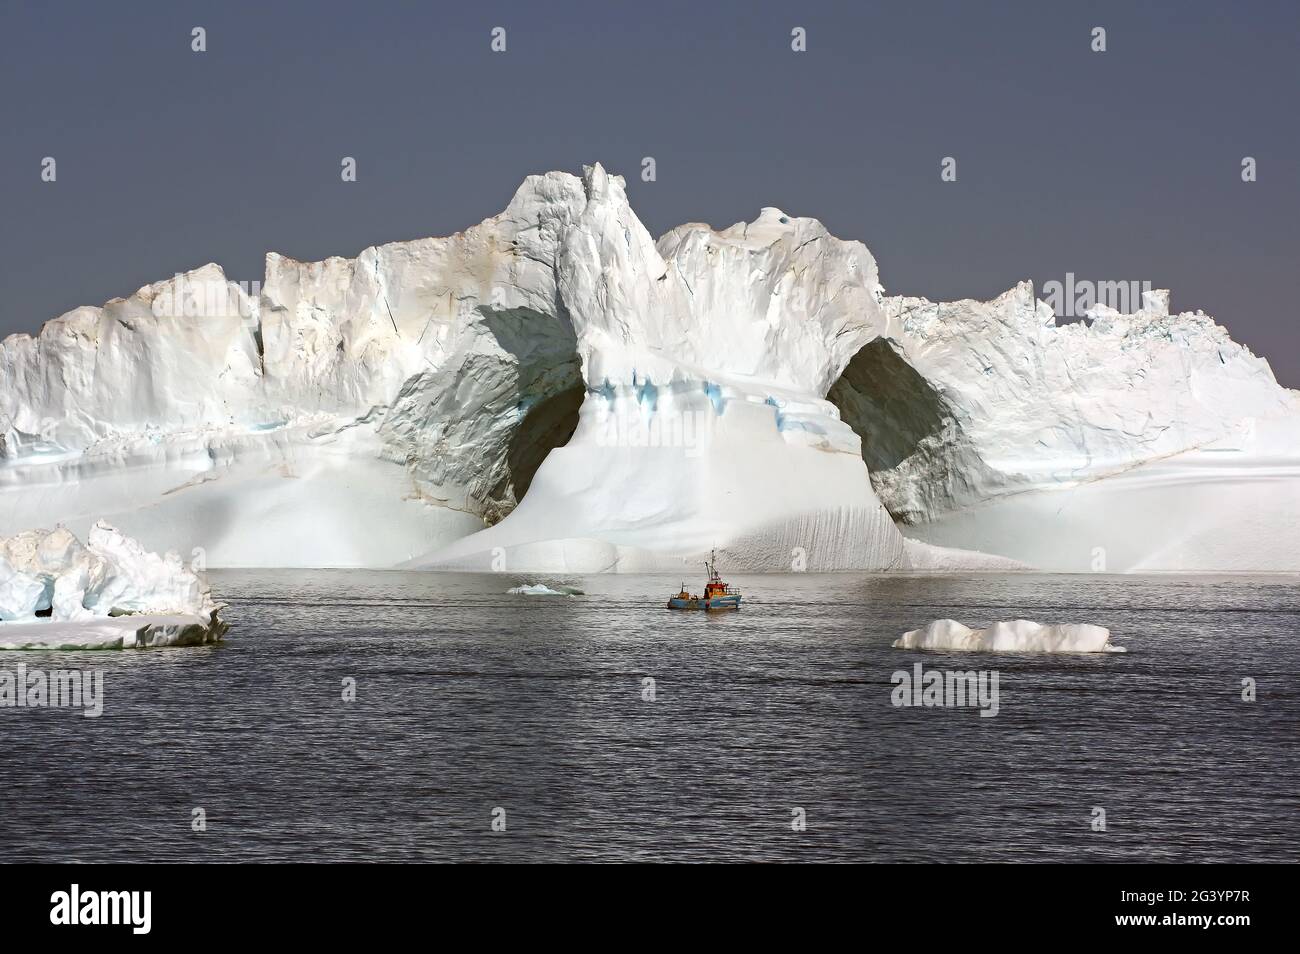 Small fishing vessel in front of icebergs, Ilulissat Stock Photo